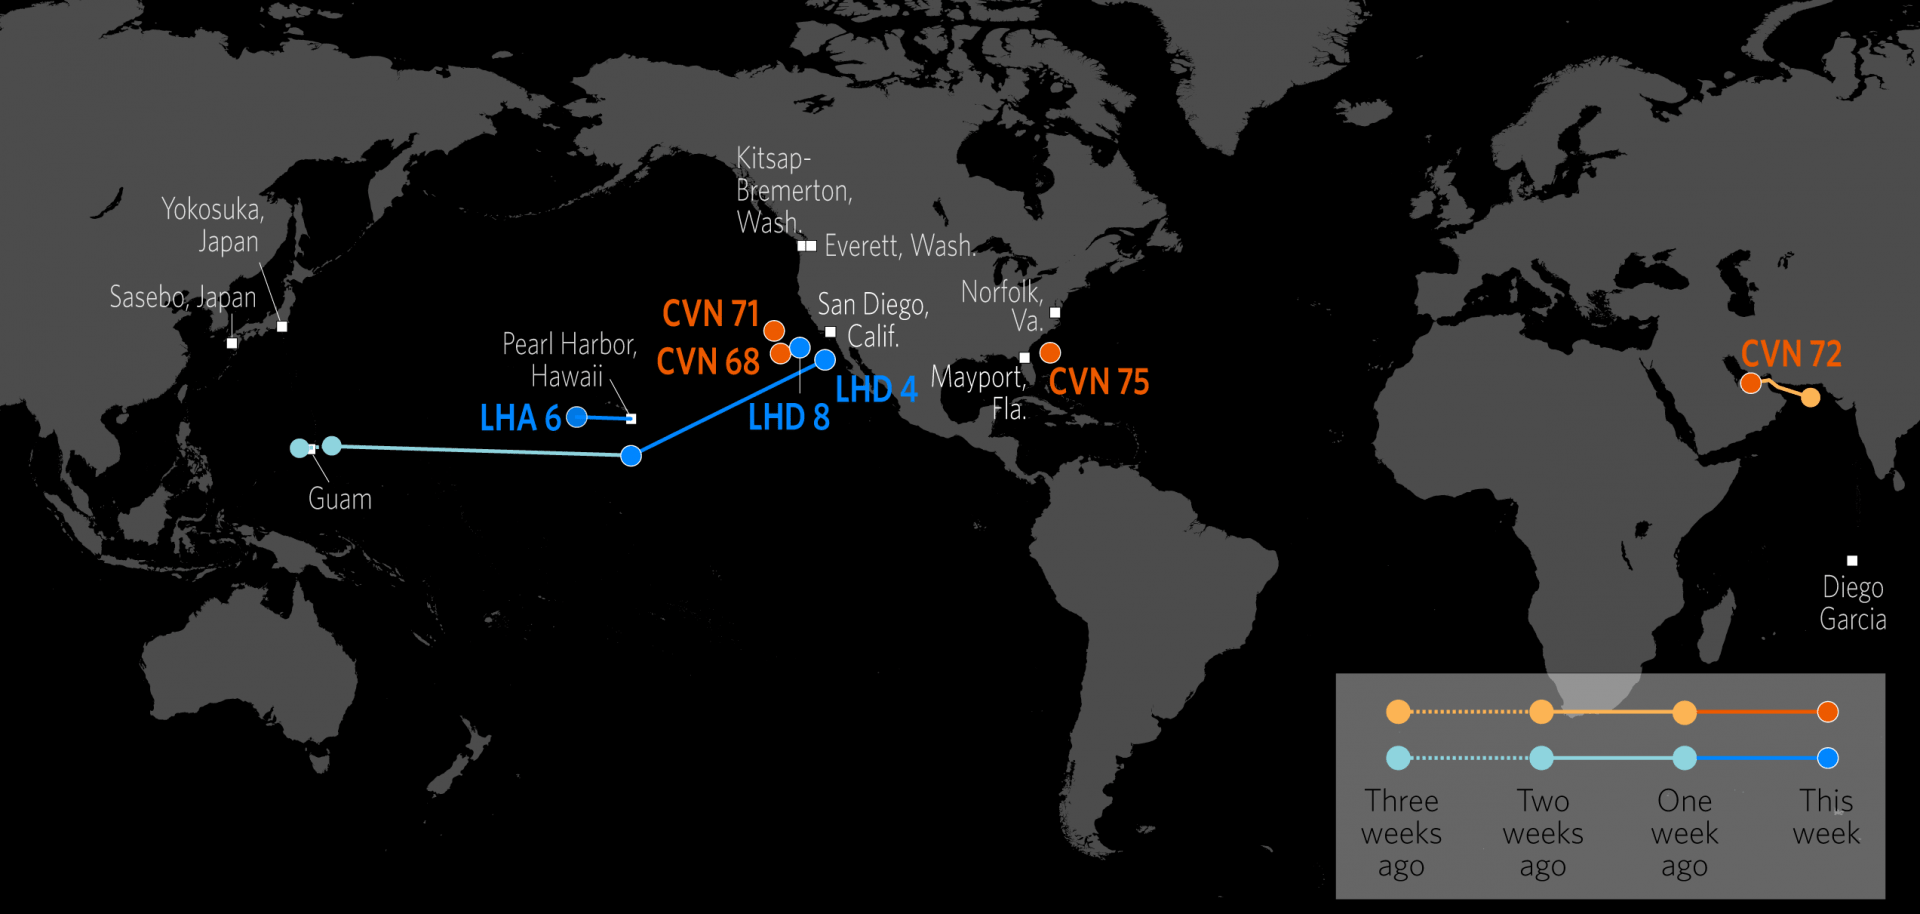 This map shows the approximate current locations of U.S. Carrier Strike Groups (CSGs) and Amphibious Ready Groups (ARGs), based on available open-source information.